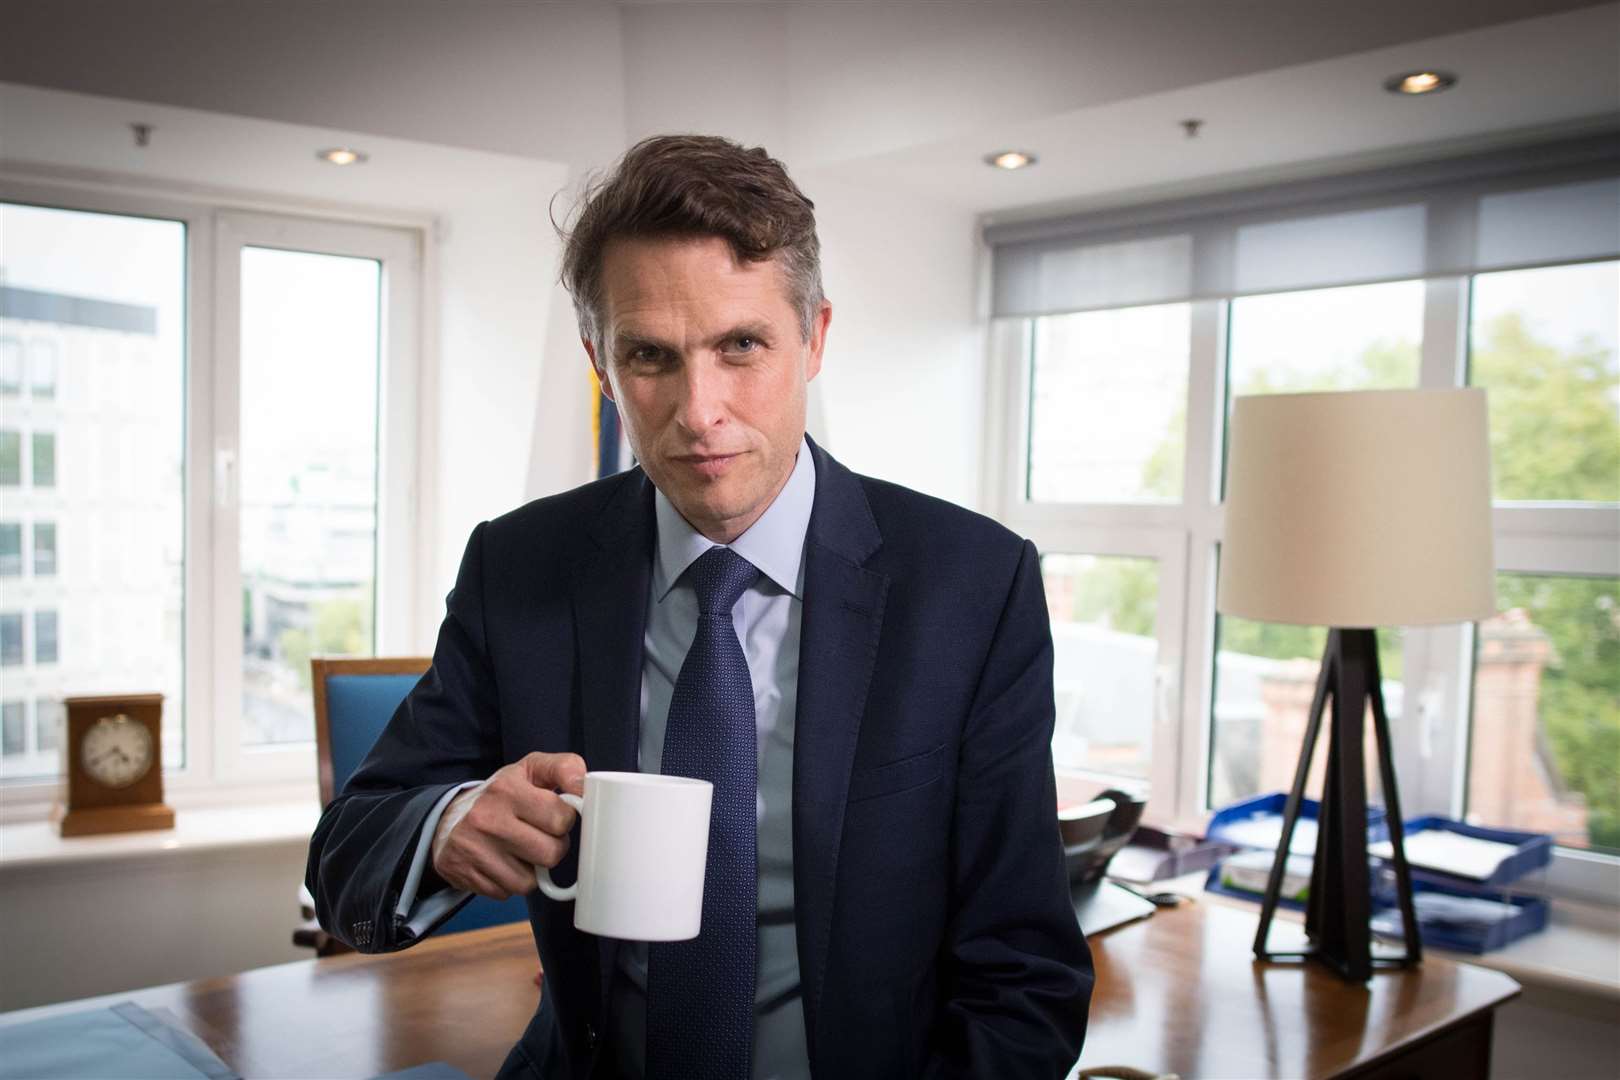 Sir Gavin Williamson has been told to apologise to MPs for his conduct (Stefan Rousseau/PA)